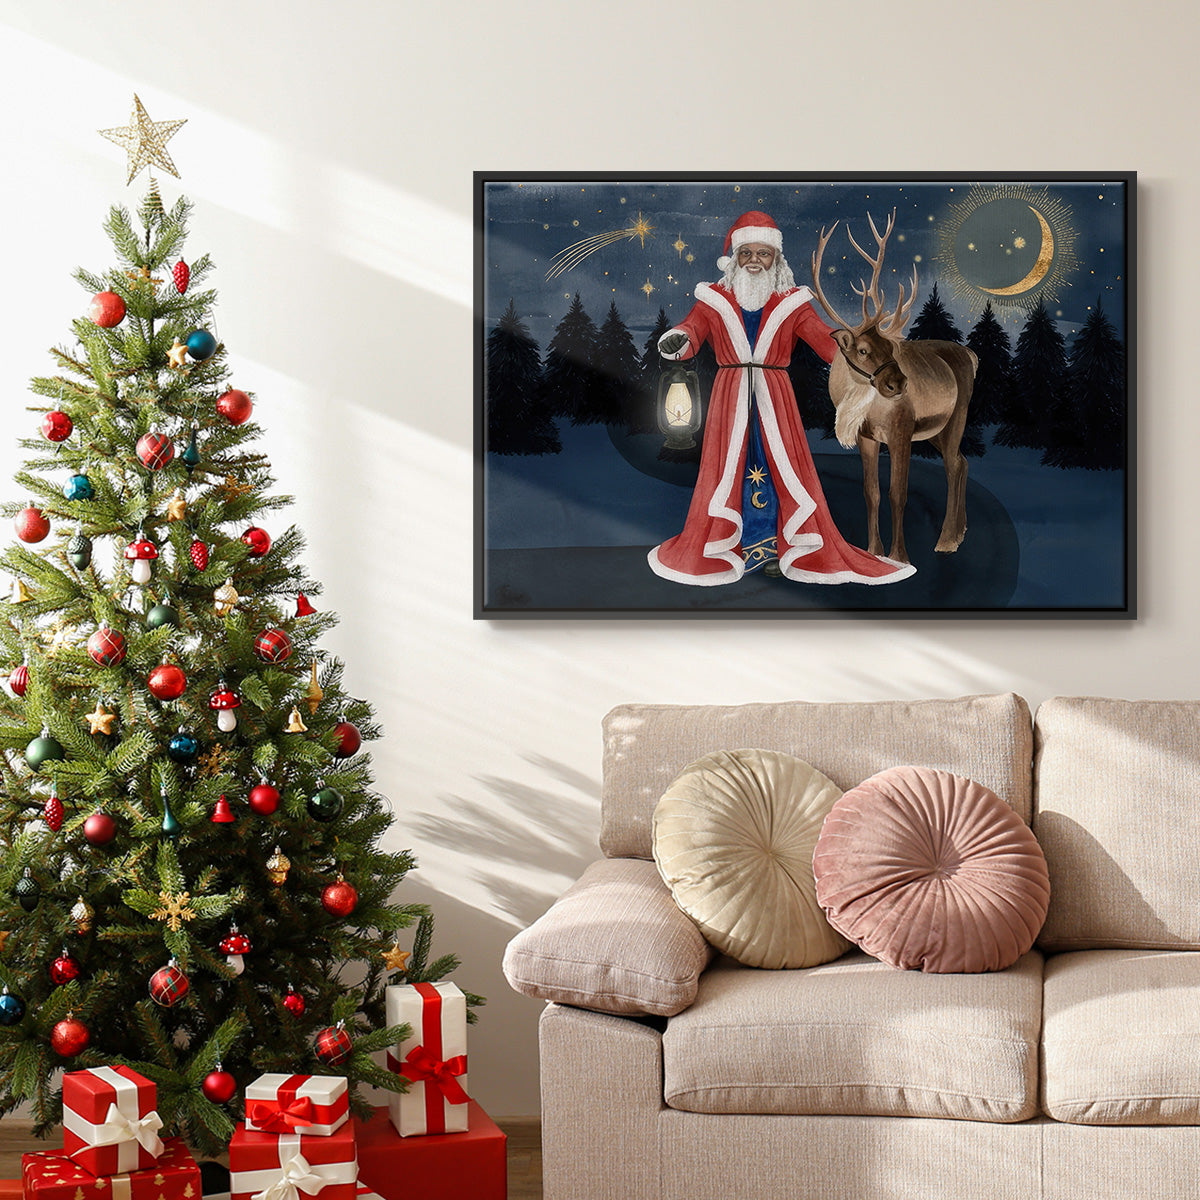 Celestial Christmas Collection A - Framed Gallery Wrapped Canvas in Floating Frame